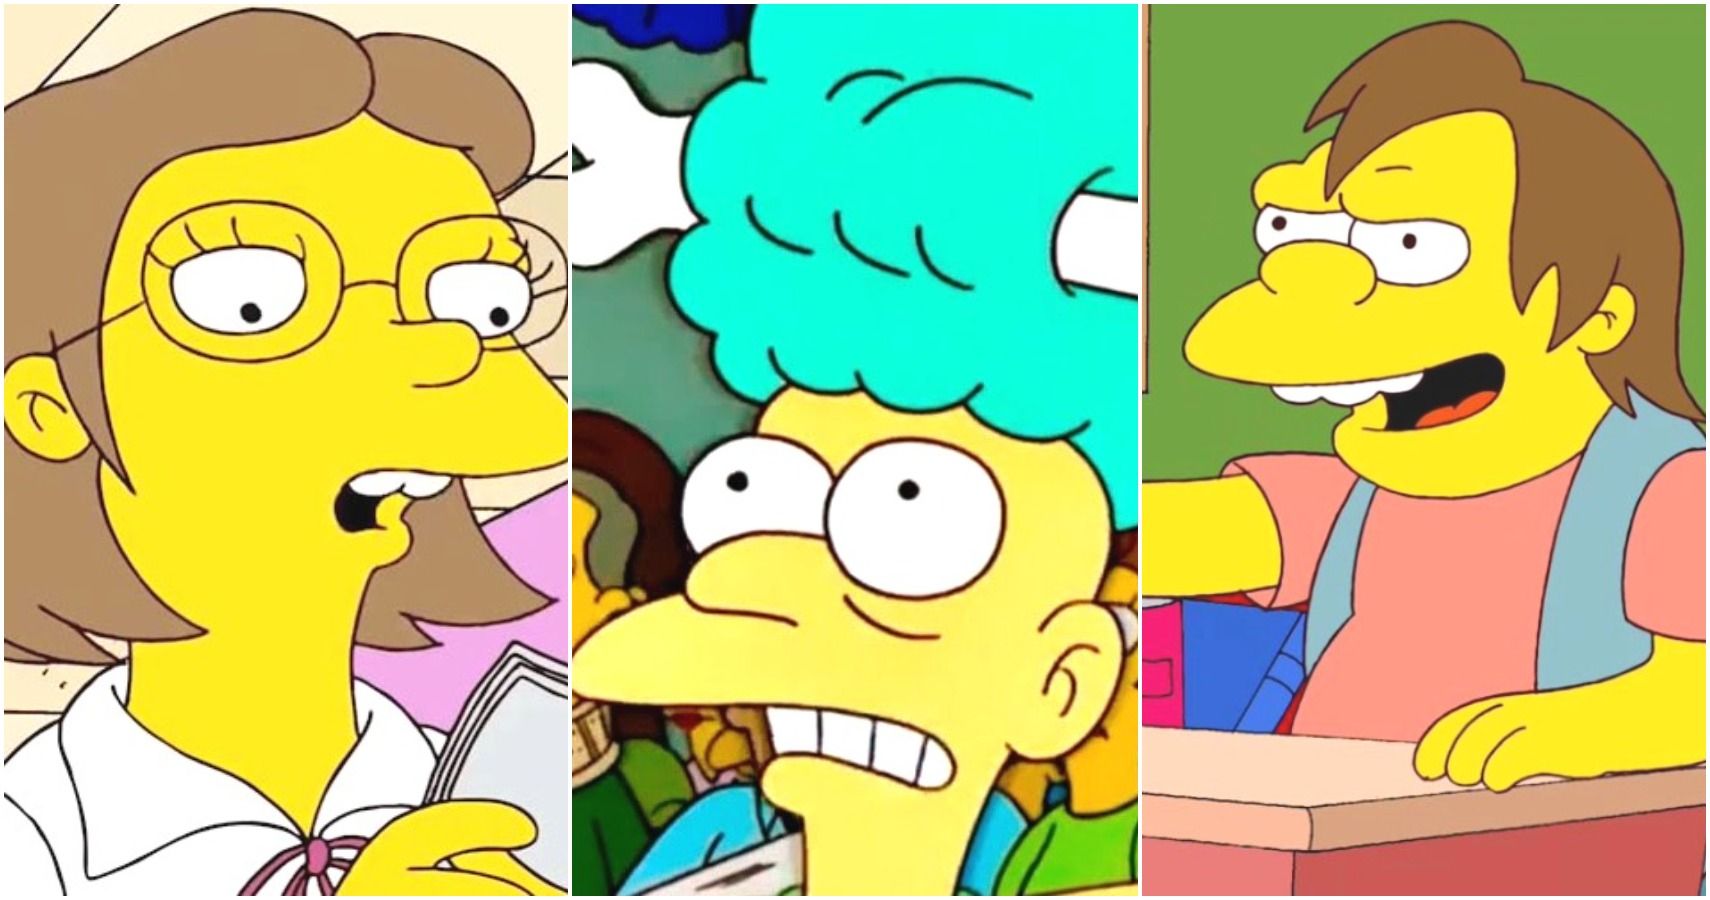 2. Marge Simpson from The Simpsons - wide 6